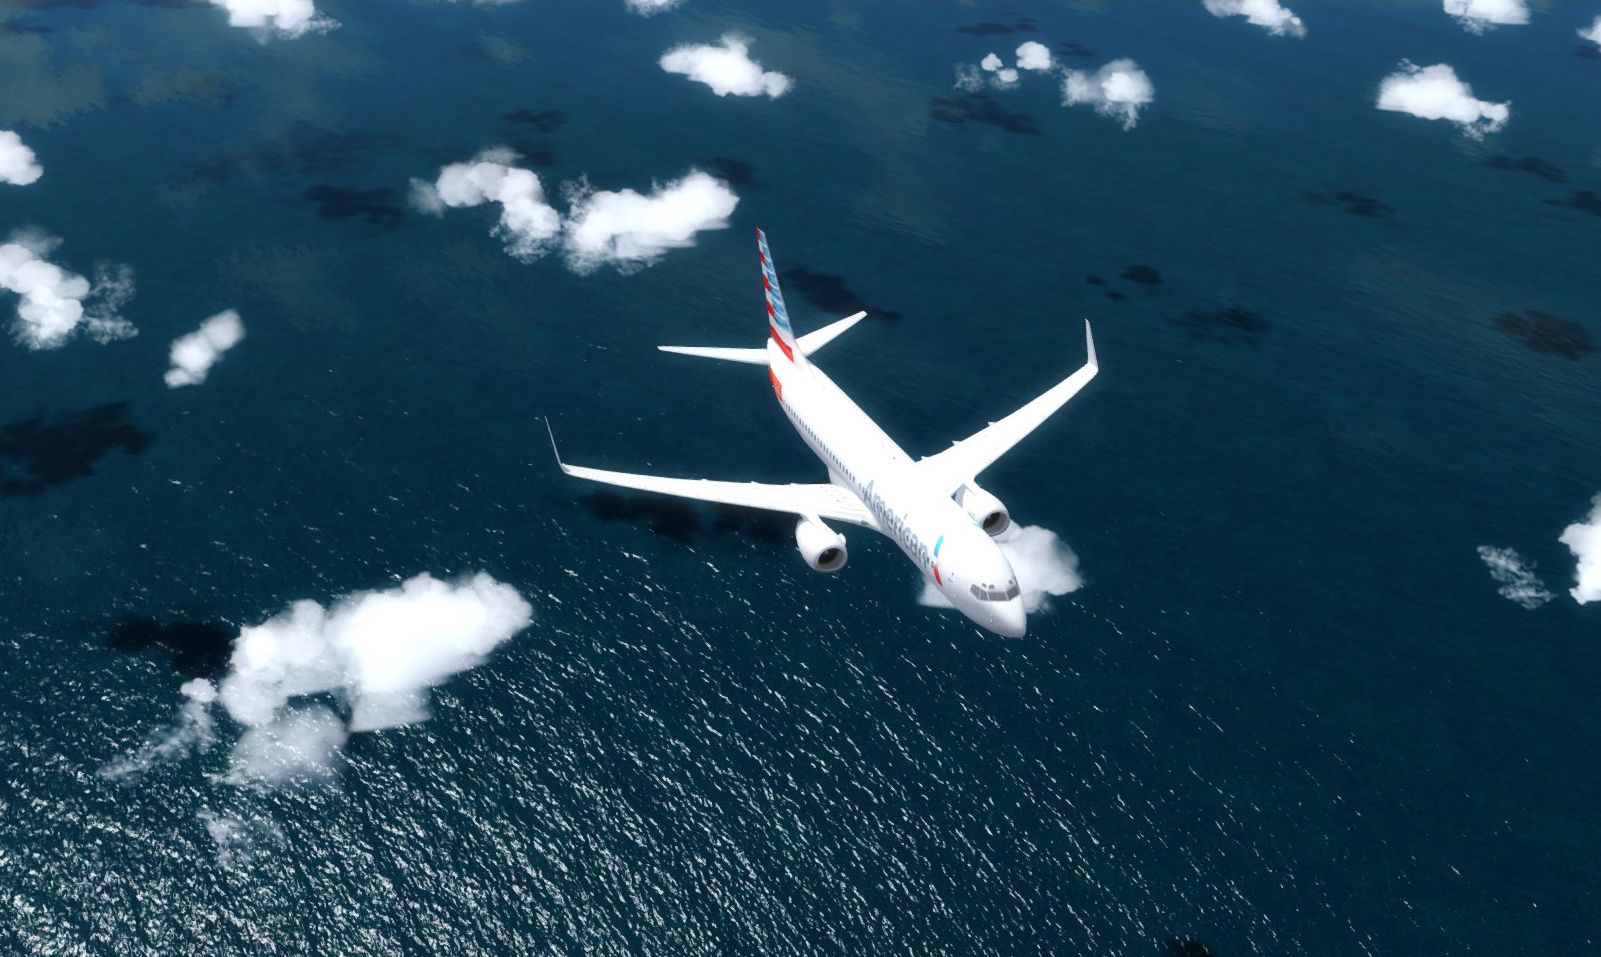 Departing KMIA climbing out over the ocean